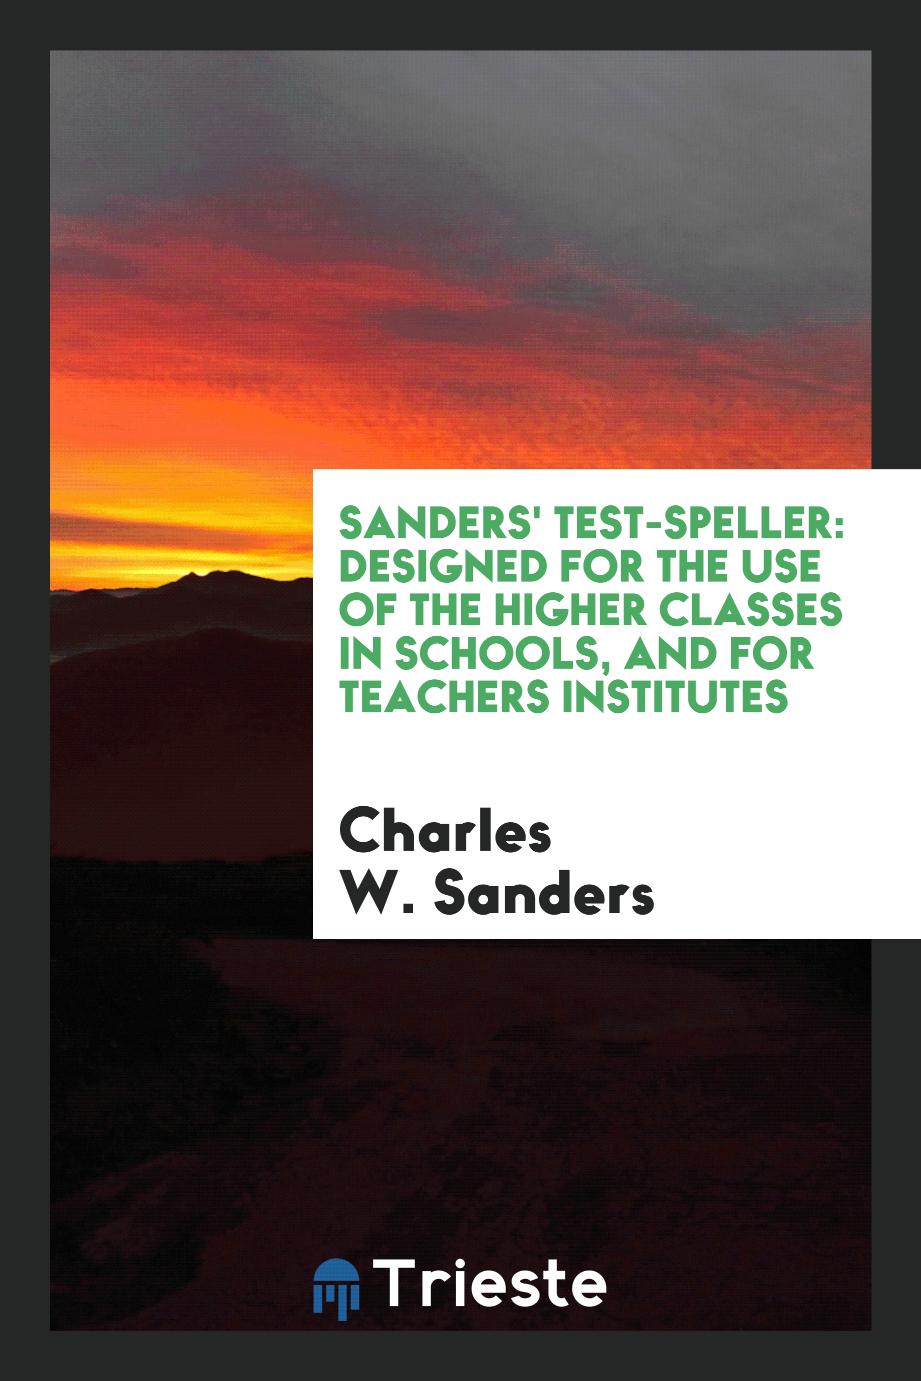 Sanders' Test-Speller: Designed for the Use of the Higher Classes in Schools, and for Teachers Institutes